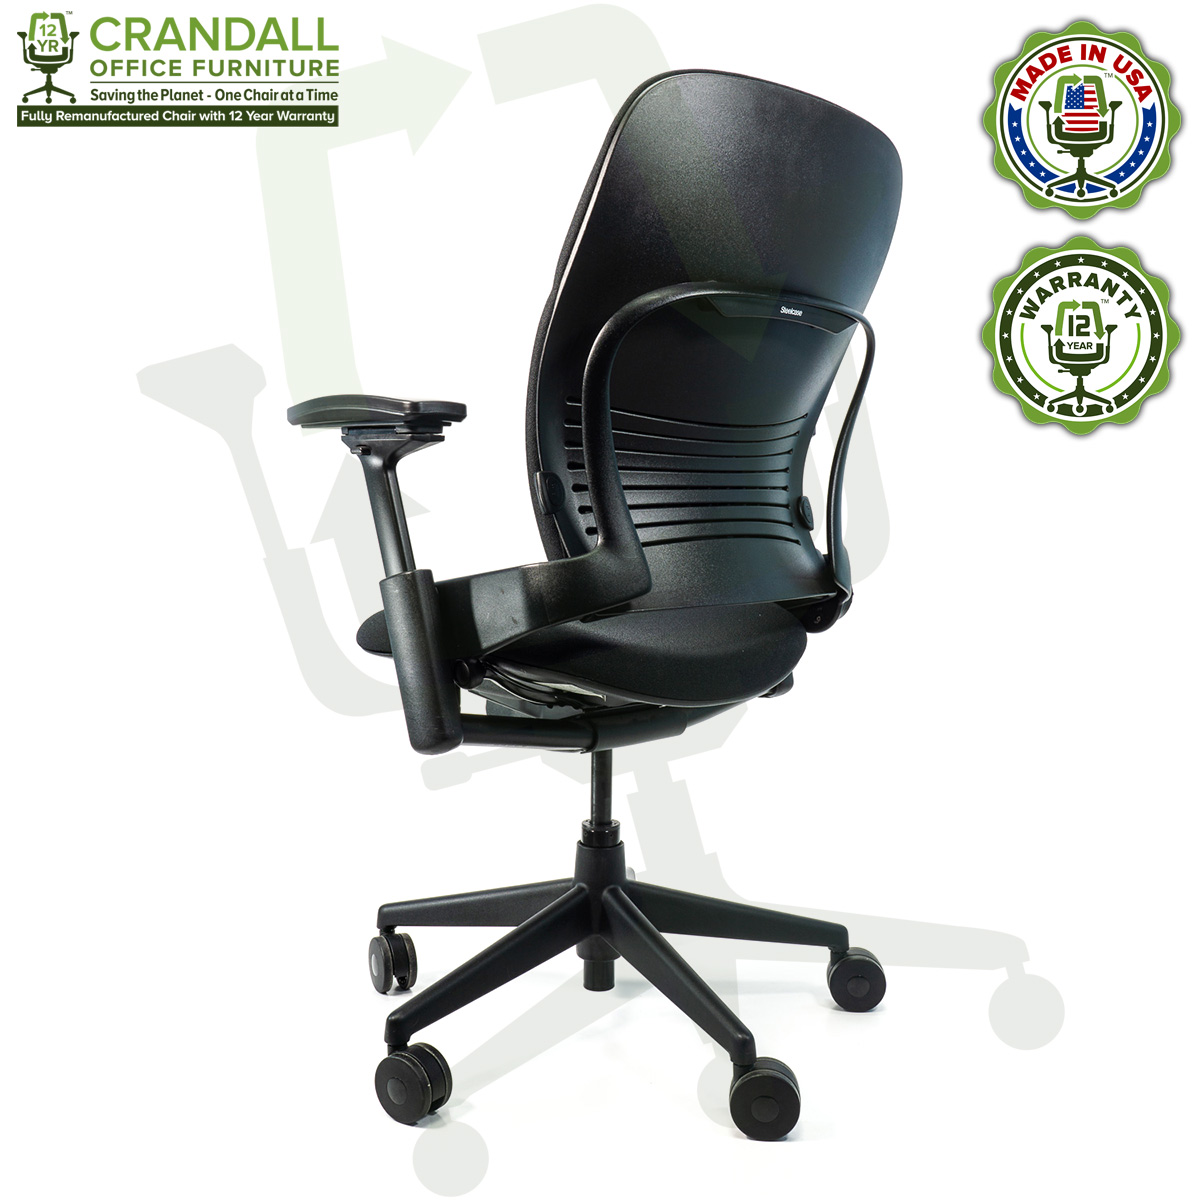 Crandall-Office-Remanufactured-Steelcase-462-V2-Leap-Chair-04